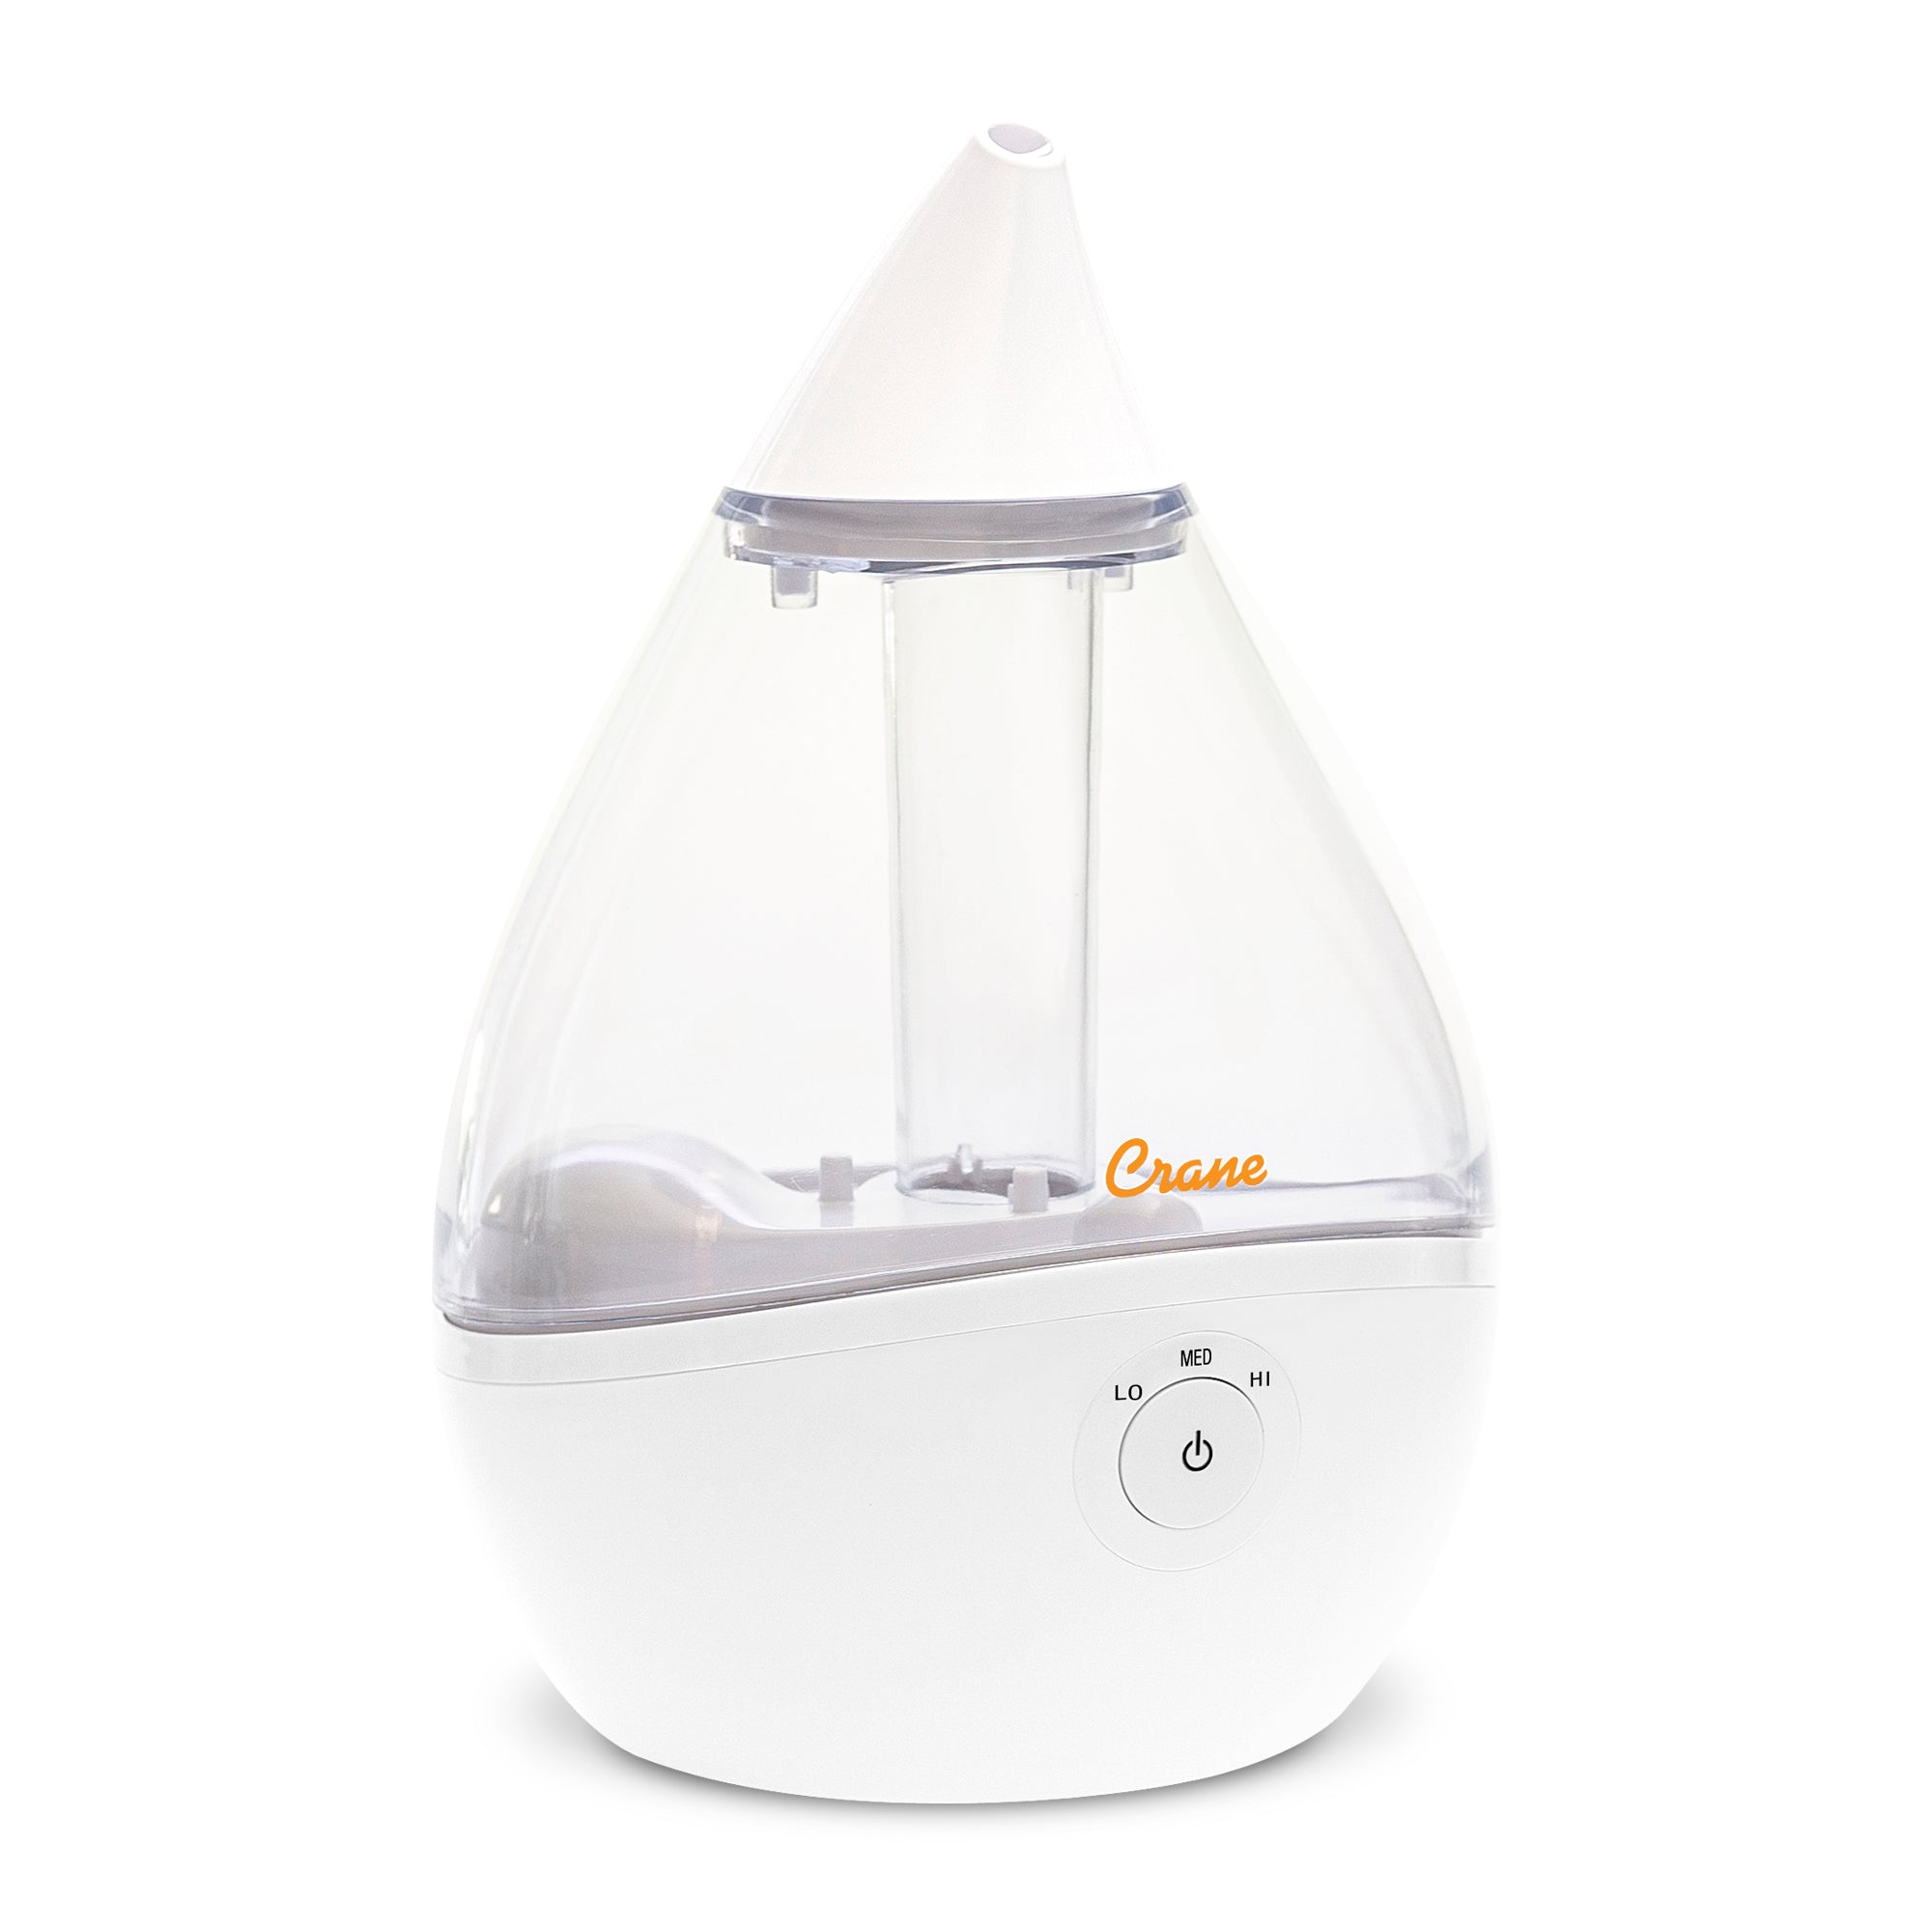 Crane RB-5302CW Droplet Ultrasonic Cool Mist 0.5 Gallon Humidifier Clear - Certified Refurbished